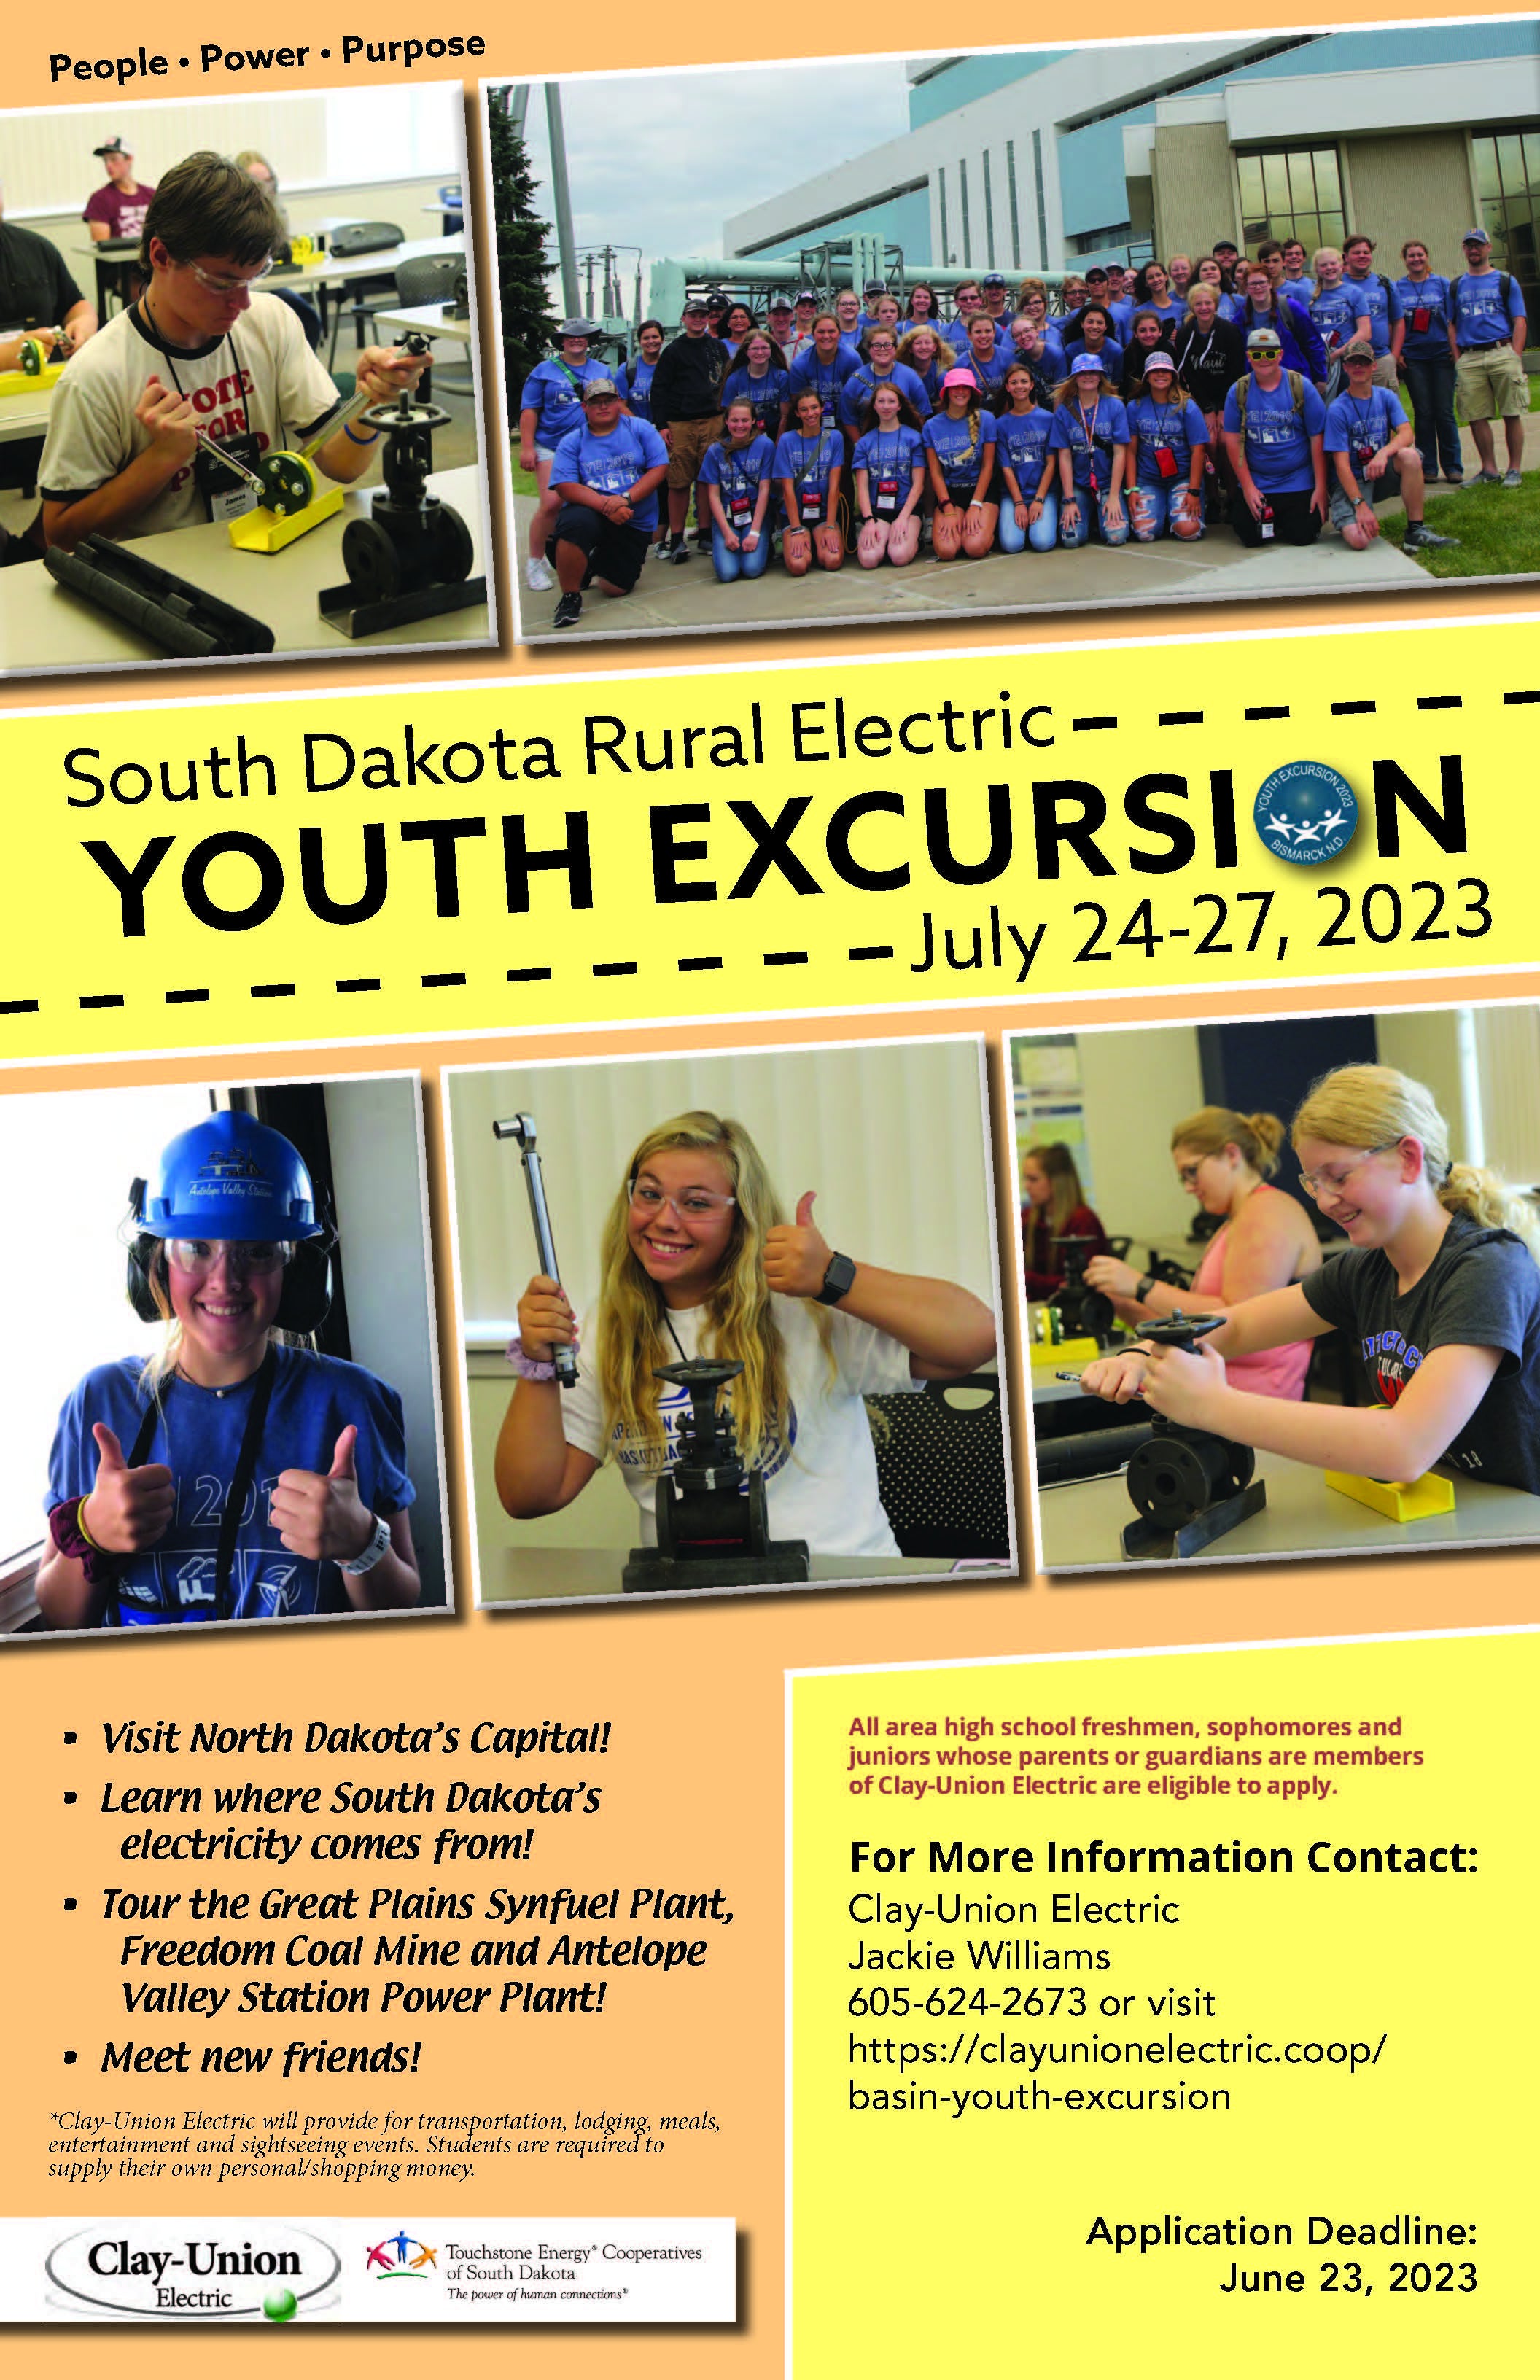 basin-youth-excursion-clay-union-electric